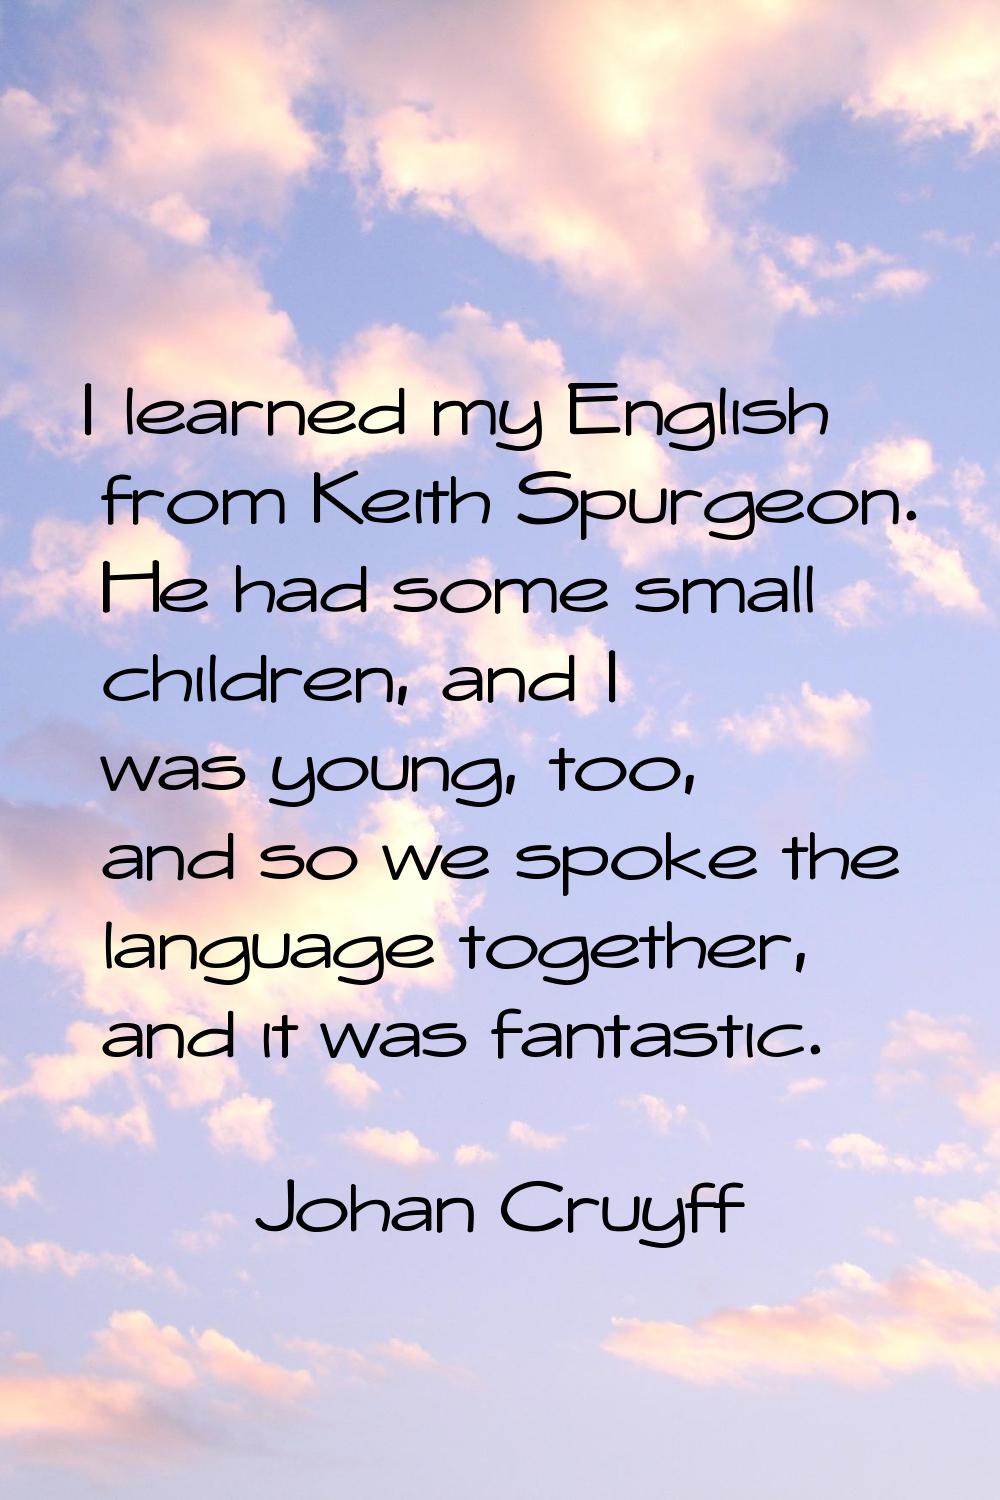 I learned my English from Keith Spurgeon. He had some small children, and I was young, too, and so 